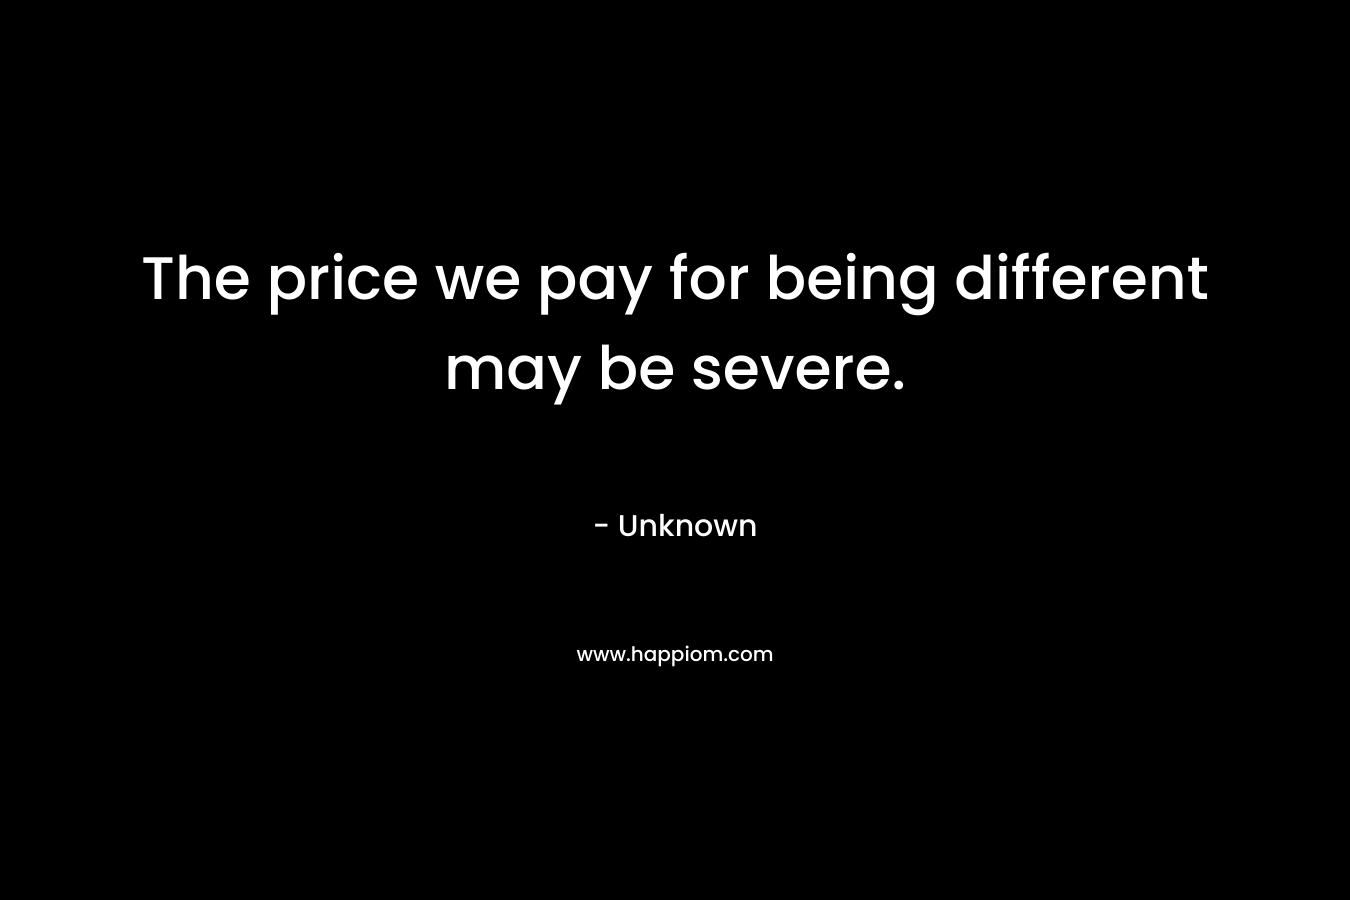 The price we pay for being different may be severe. – Unknown